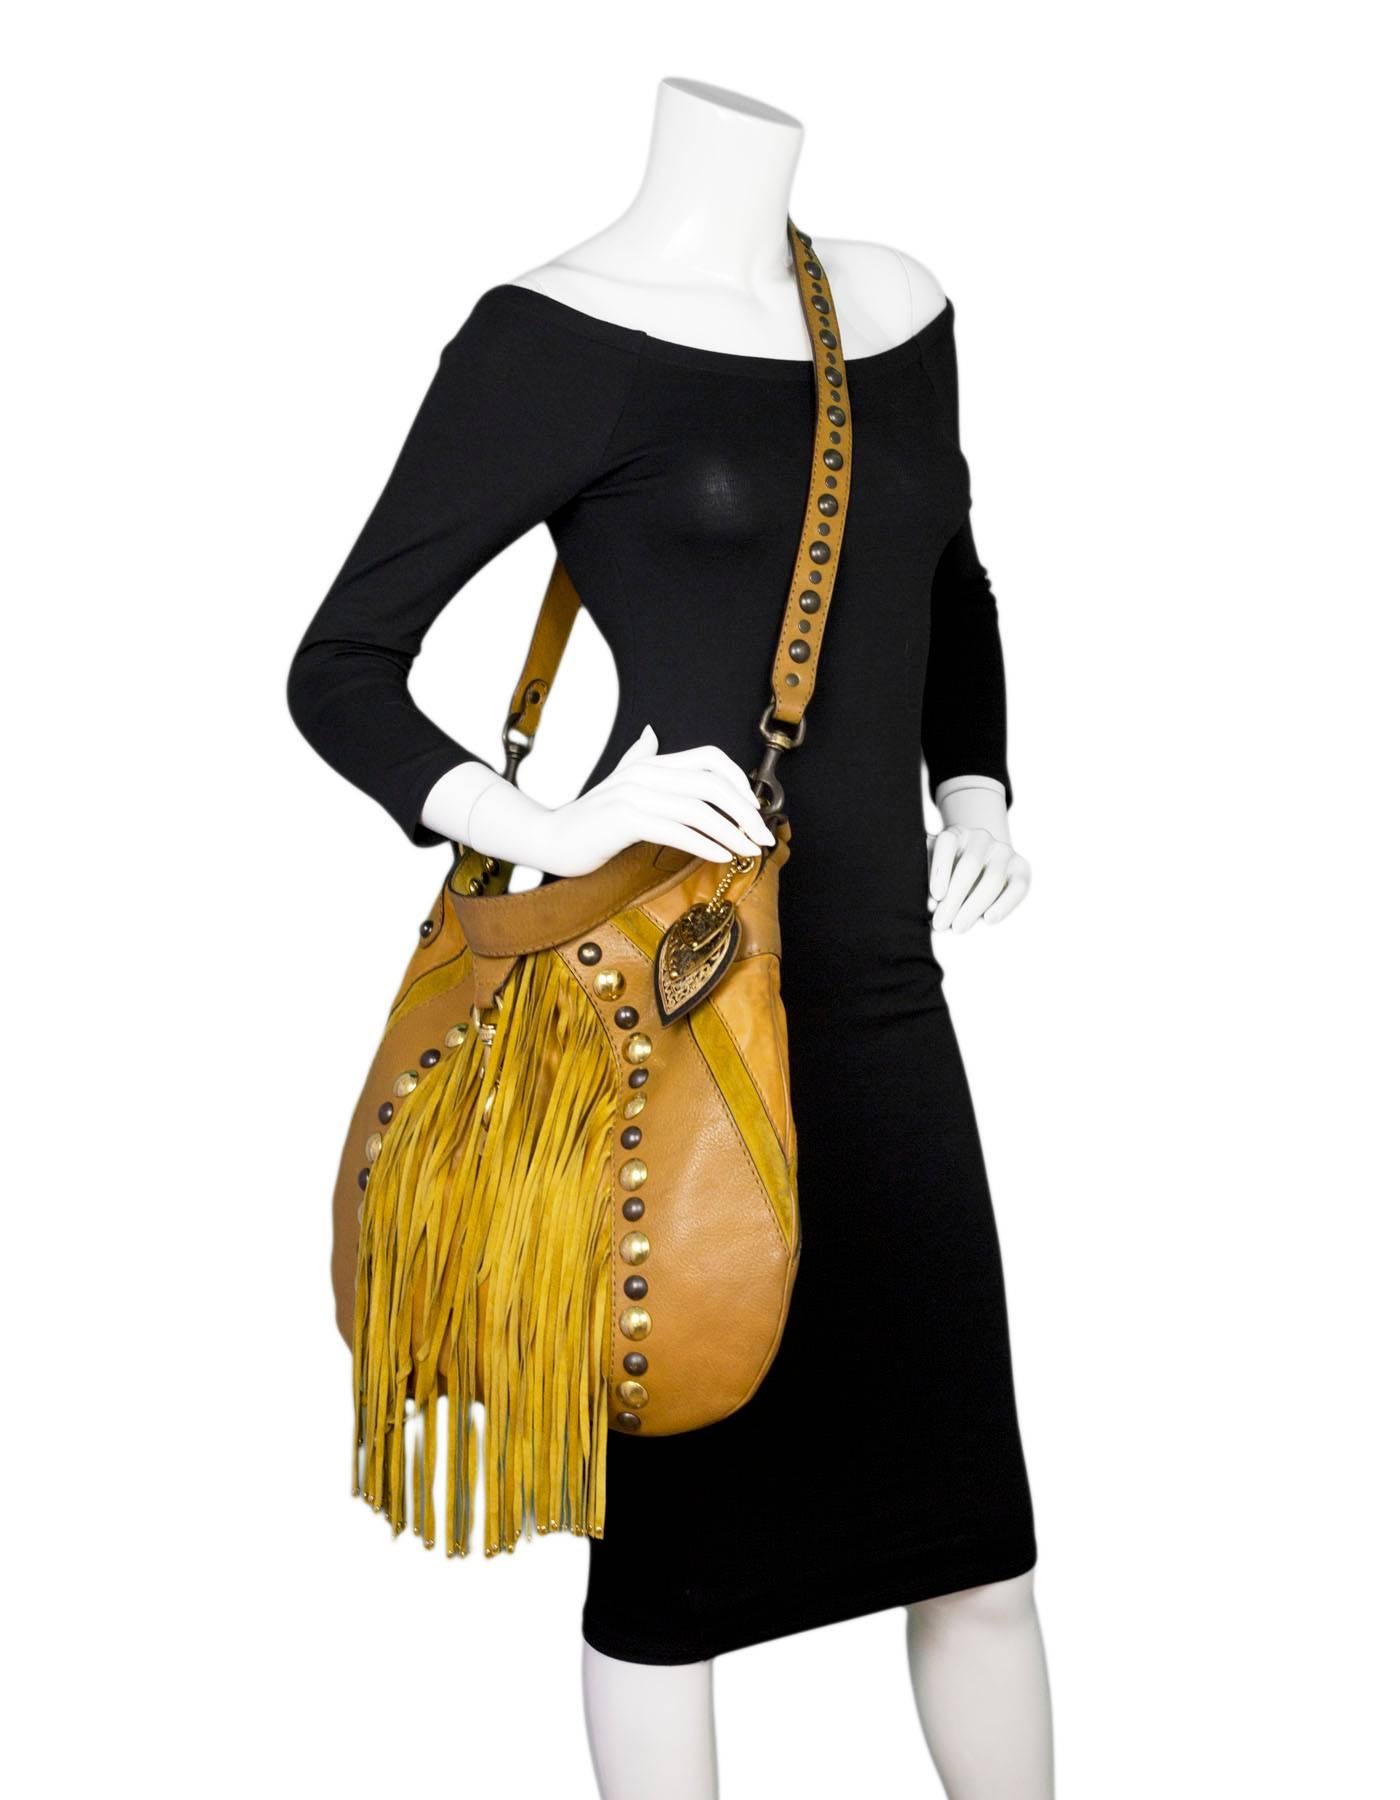 Gucci Tan Leather & Suede Babouska Satchel Bag
Features fringe and studding throughout

Made In: Italy
Color: Tan
Hardware: Goldtone, brass
Materials: Leather, suede, metal
Lining: Brown textile
Closure/Opening: Open top with center